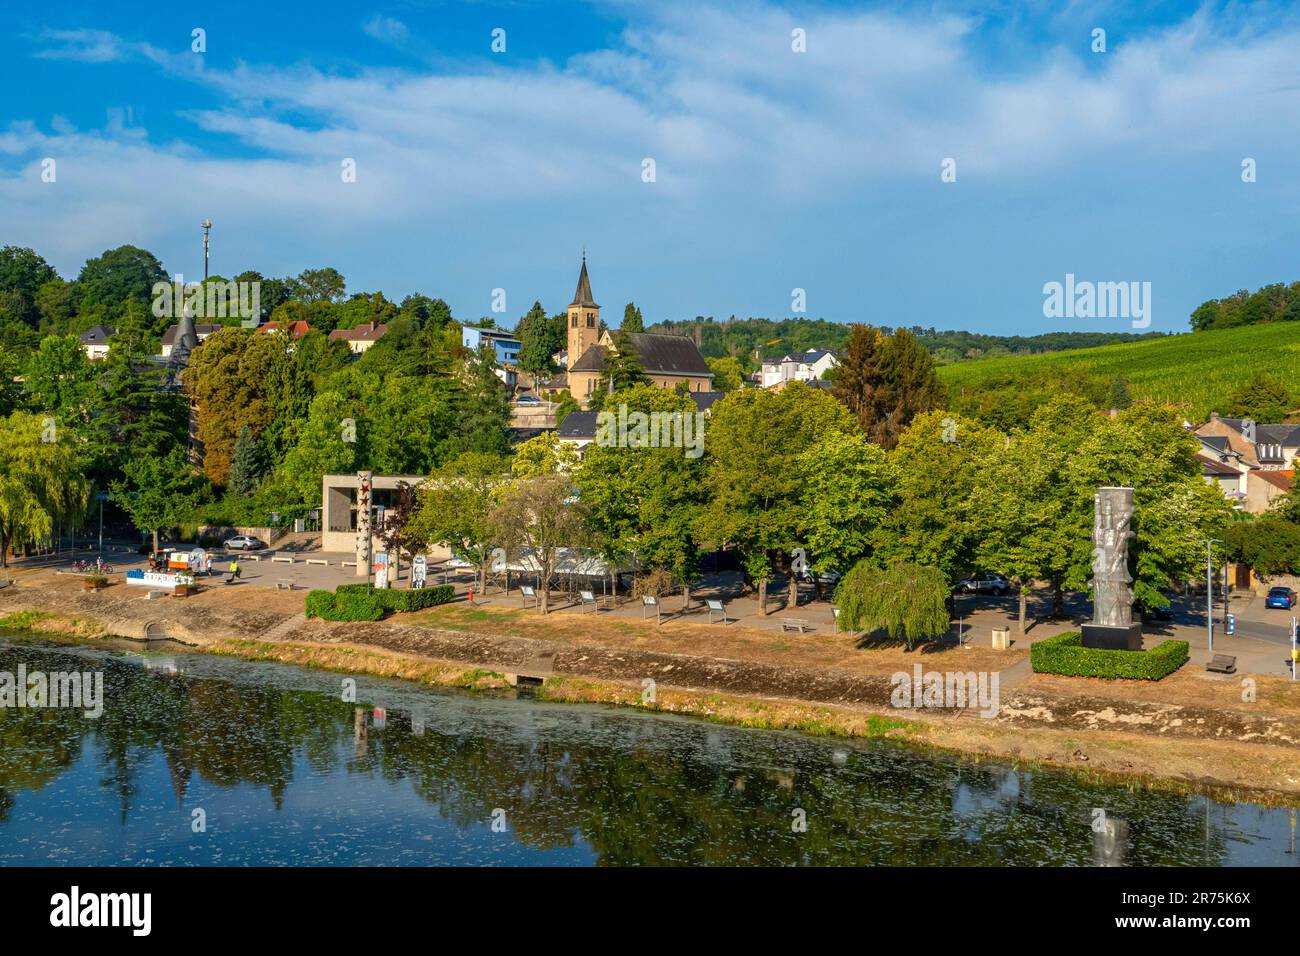 Schengen, Benelux, Benelux countries, Moselle valley, Moselle, Remich canton, Luxembourg Stock Photo